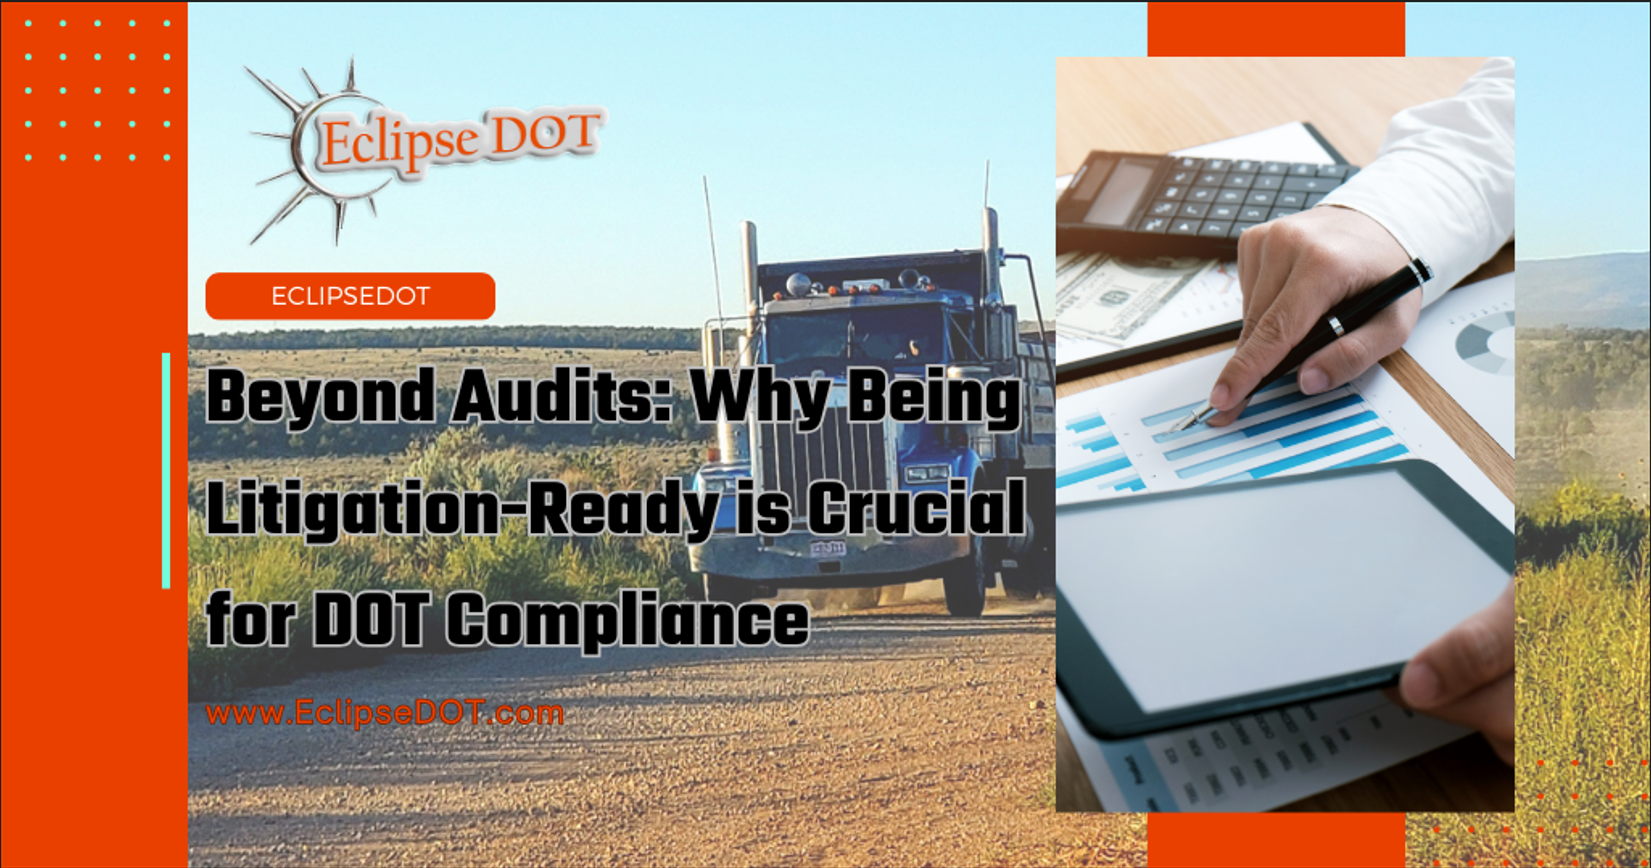 Beyond Audits: Why Being Litigation-Ready is Crucial for DOT Compliance: A Legal Readiness Concept for Regulative Compliance